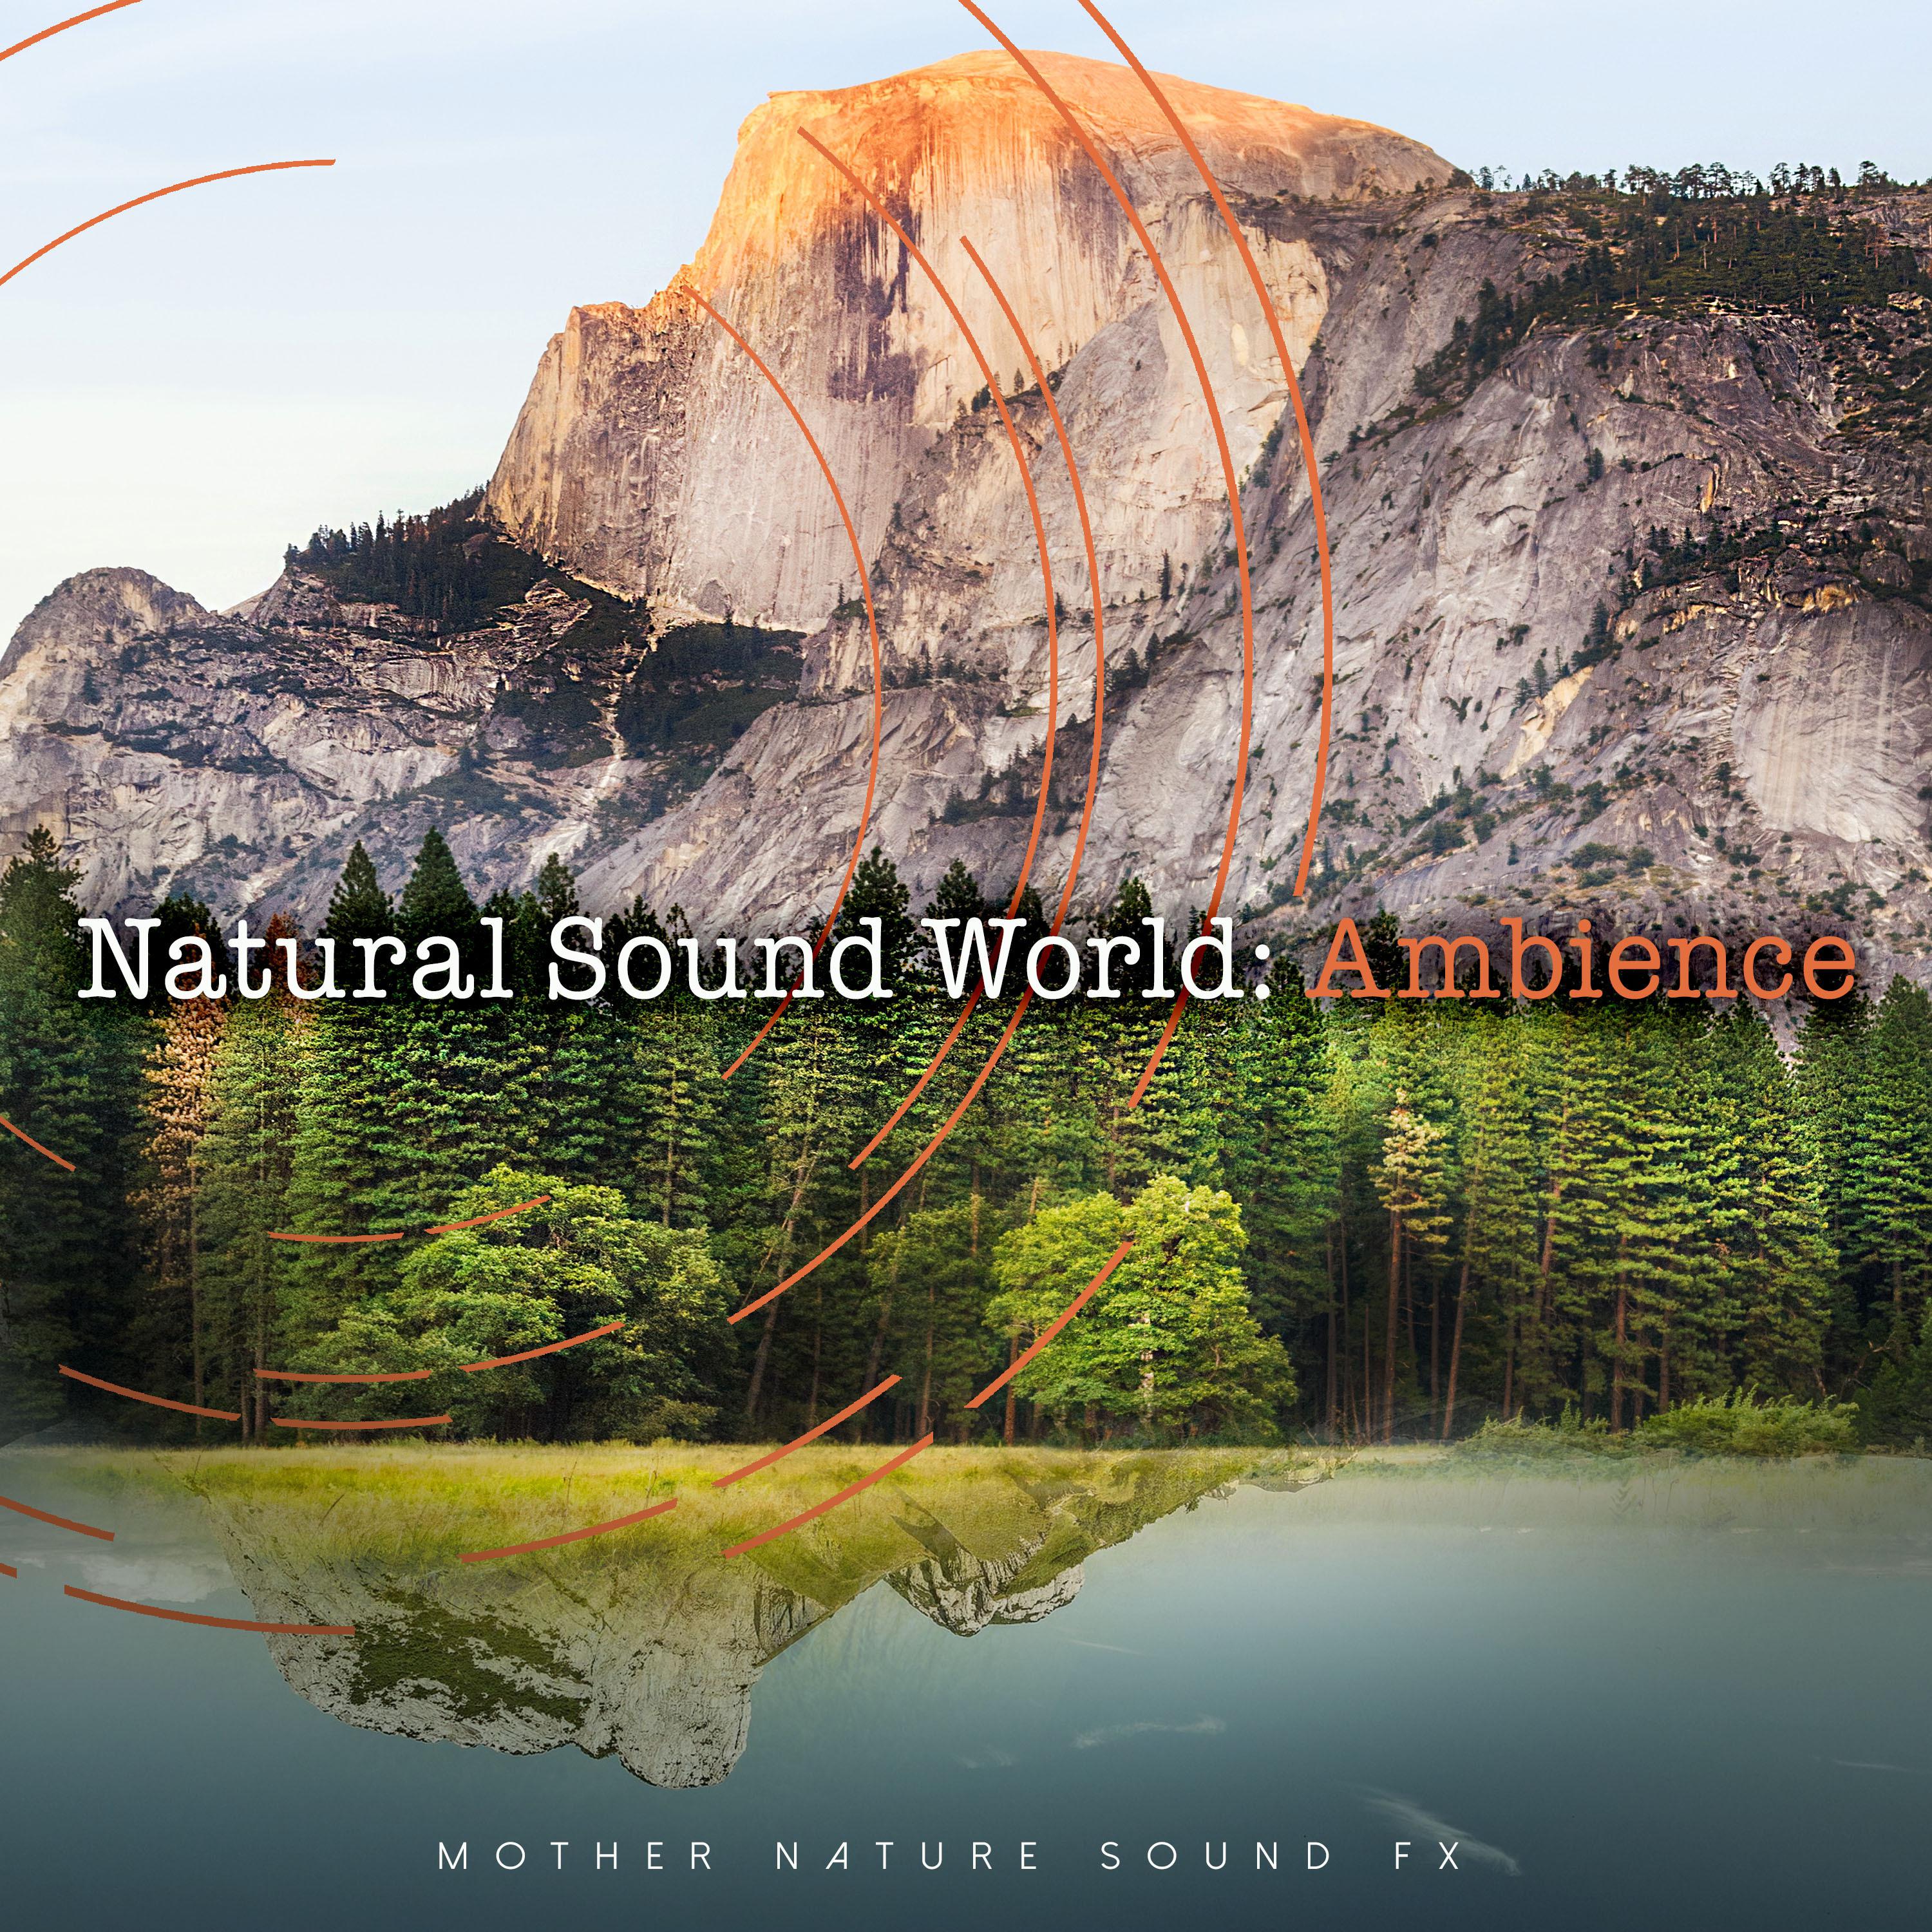 Natural Sound World: Ambience